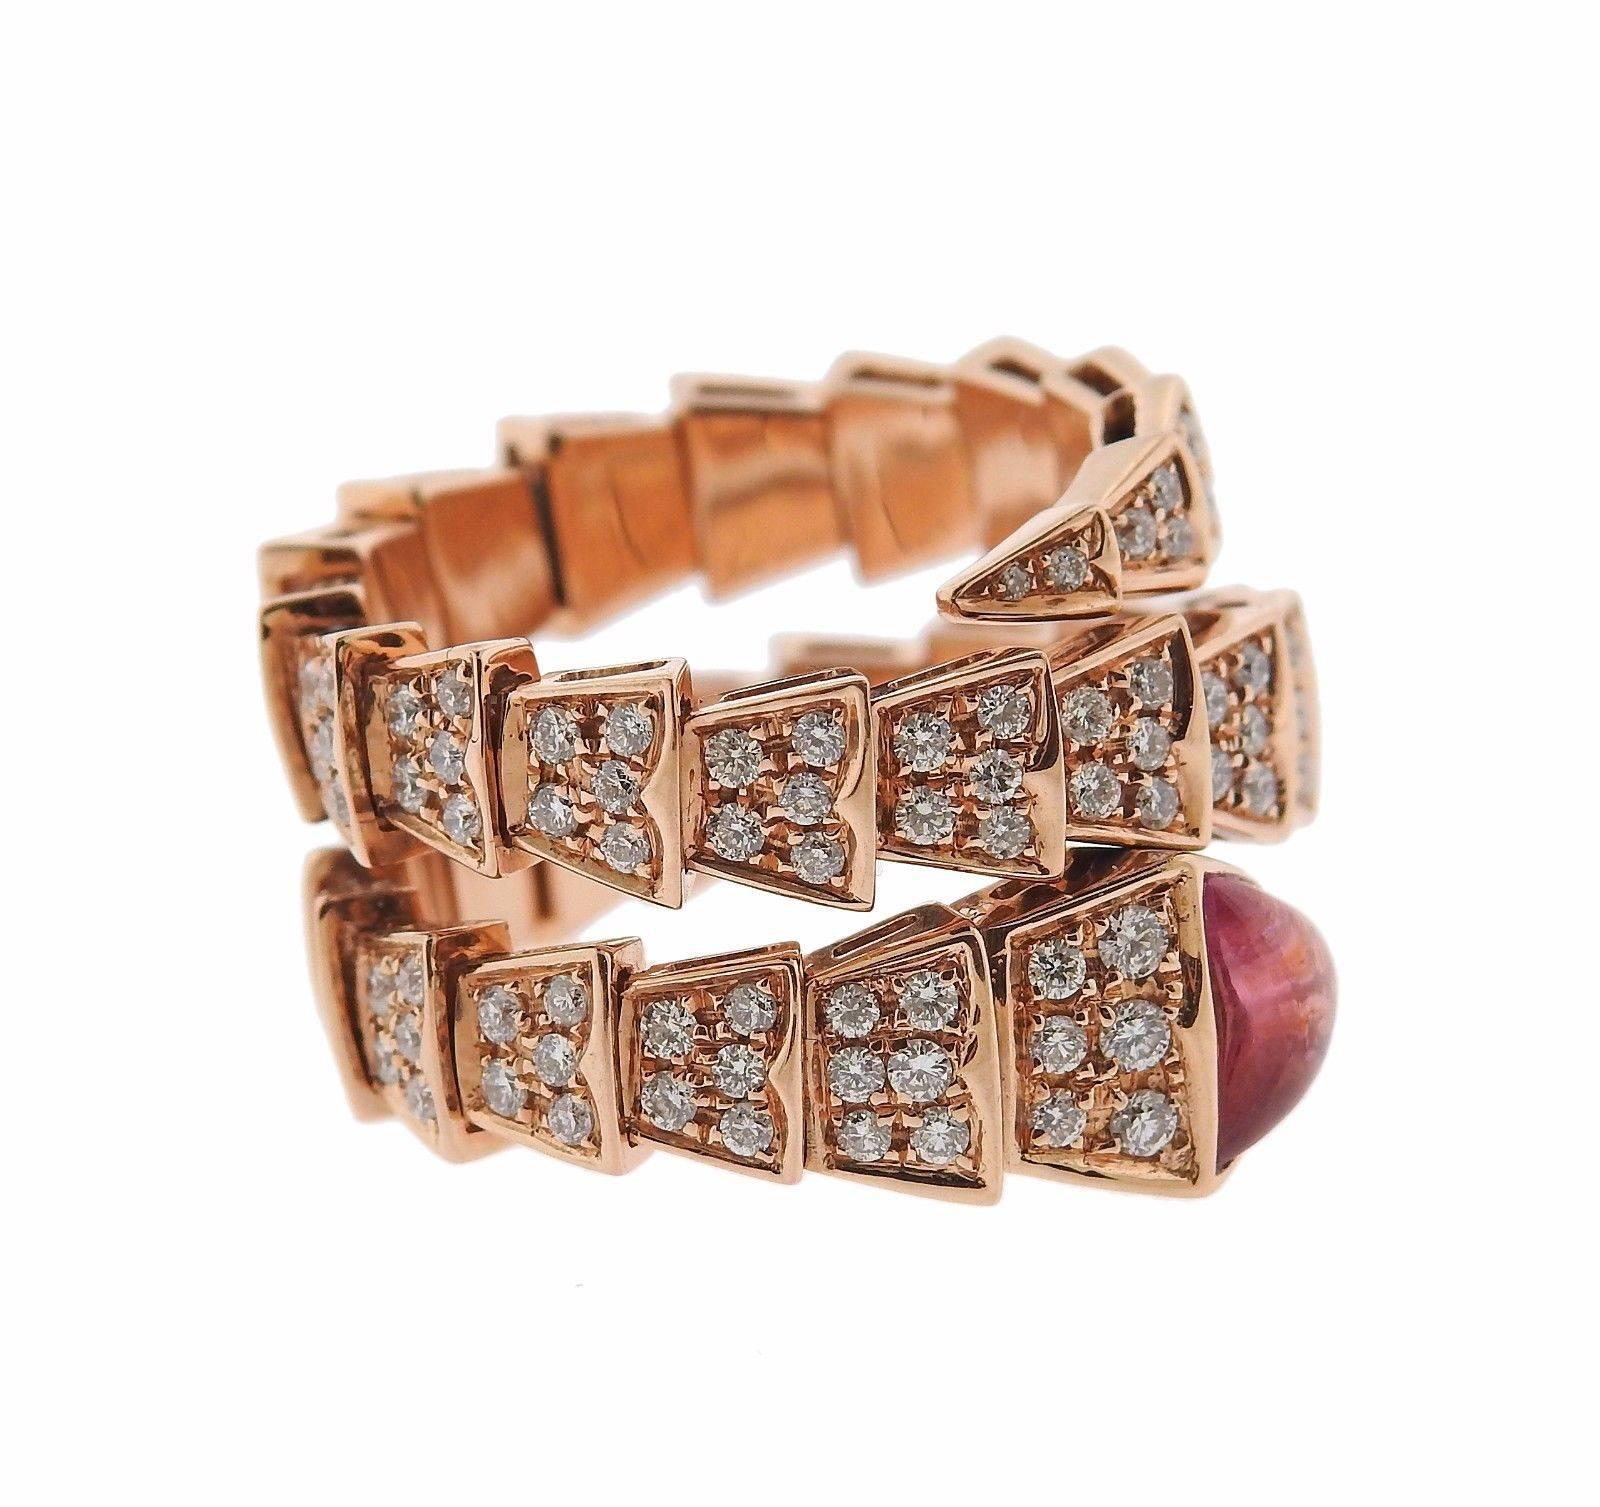 An 18k rose gold ring set with a tourmaline and approximately 2.50ctw of G/VS diamonds.  The ring is a size 7 (slightly flexible due to ring design) and is approx. 16mm wide.  The weight of the piece is 14.5 grams. Marked: Bvlgari, 750, made in